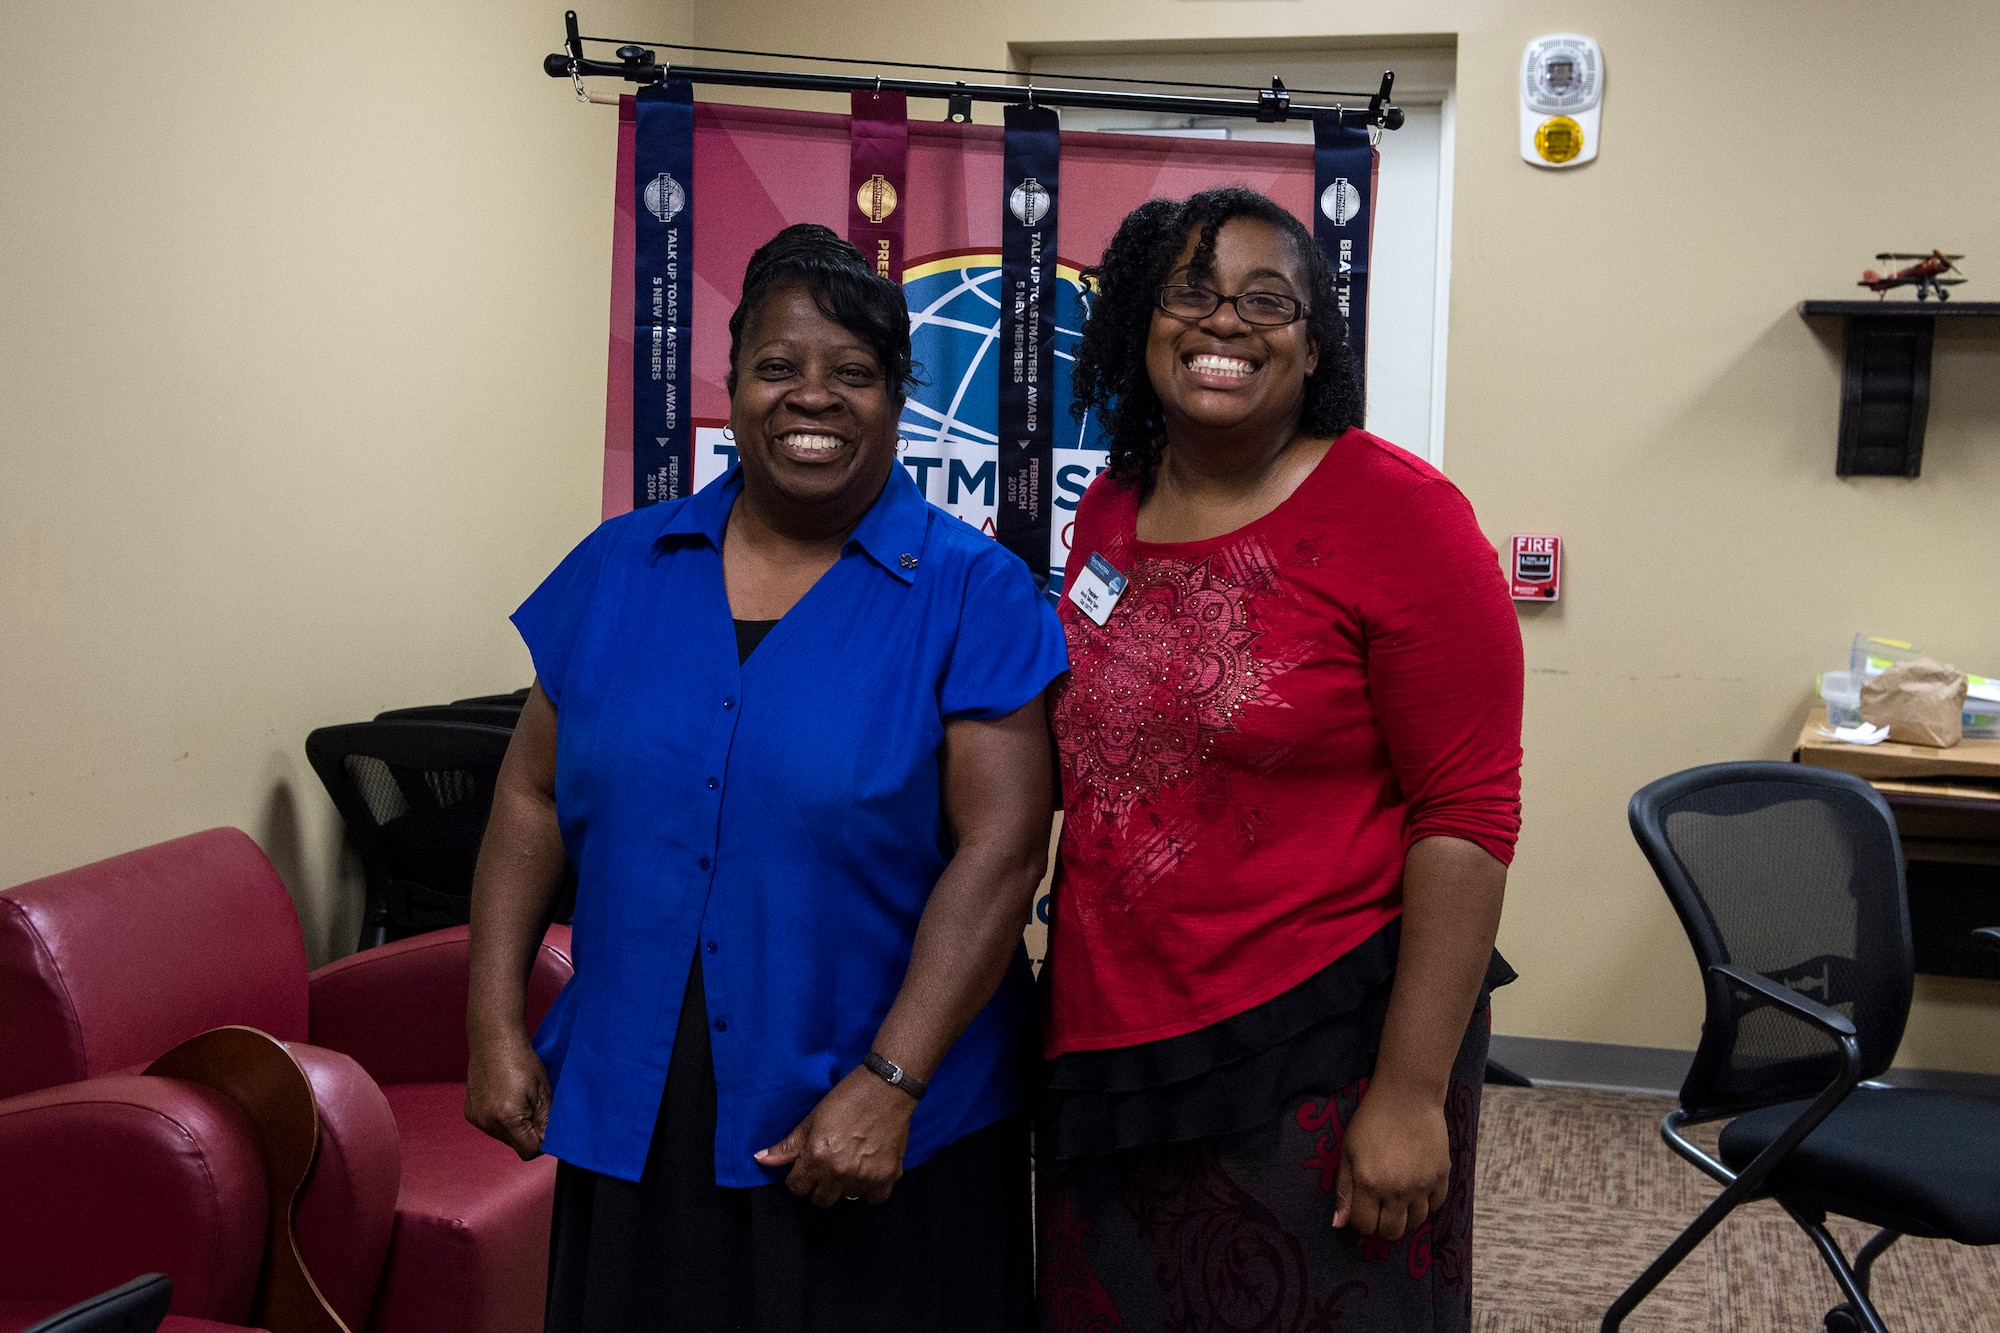 Barbara Miller, 23d Contracting Squadron contracting officer, left, poses for a photo with Katrice Colvin, 23d Force Support Squadron base training manager, right, after receiving her Toastmasters International certified judge pin, Aug. 25, 2016, at Moody Air Force Base, Ga. Certified judges pick winners during speech competitions for Toastmasters International and must successfully complete a training seminar to earn the title. (U.S. Air Force photo by Airman 1st Class Janiqua P. Robinson)